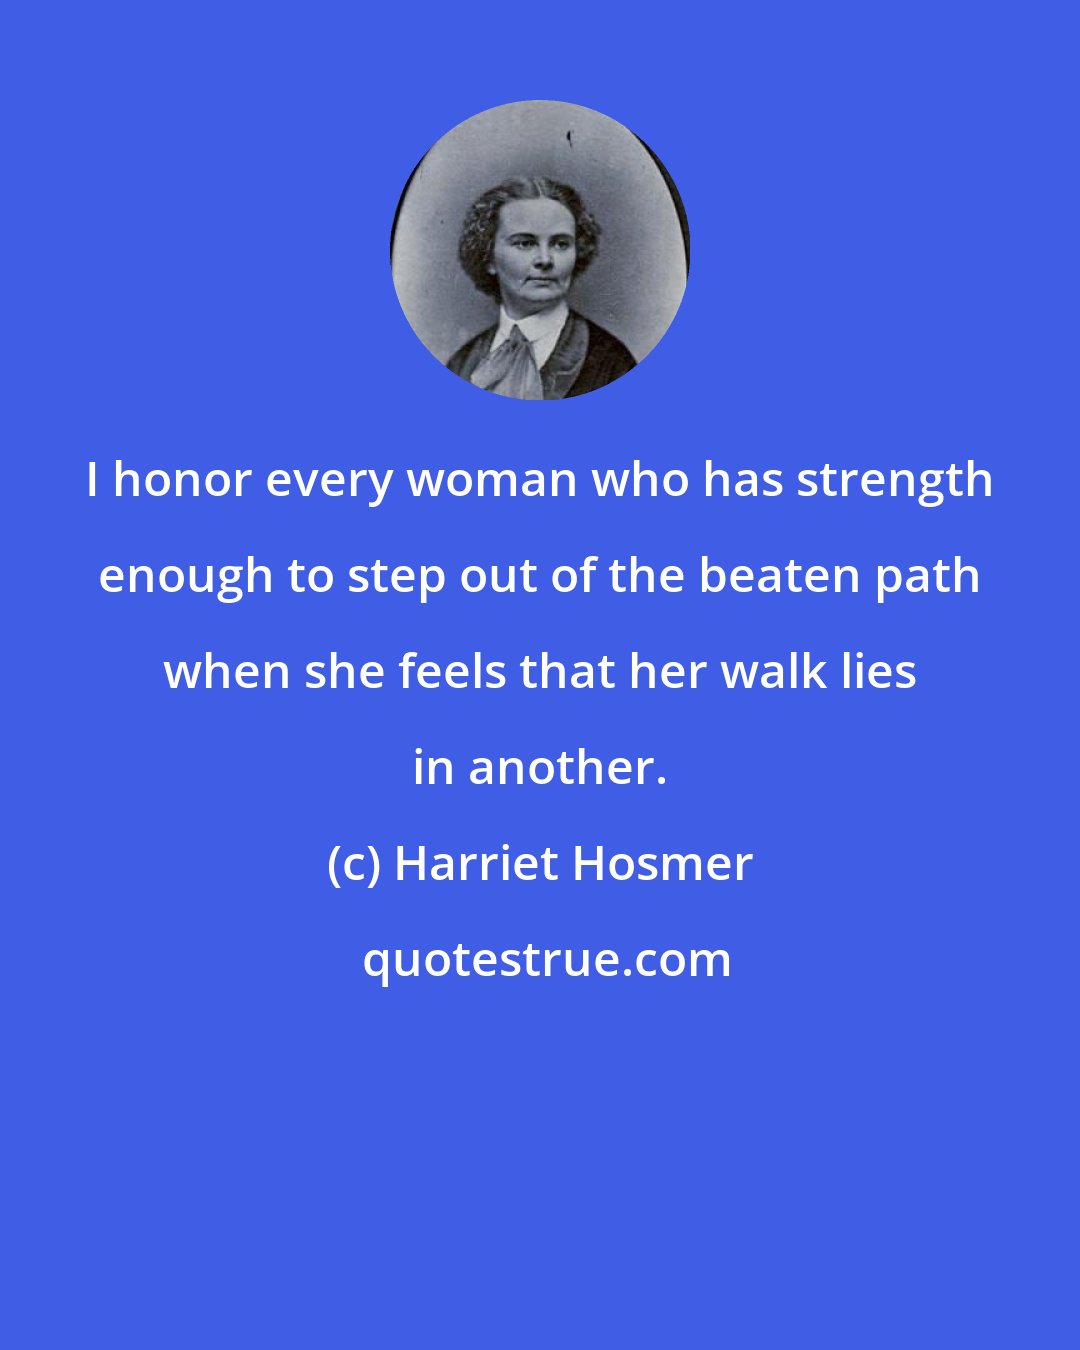 Harriet Hosmer: I honor every woman who has strength enough to step out of the beaten path when she feels that her walk lies in another.